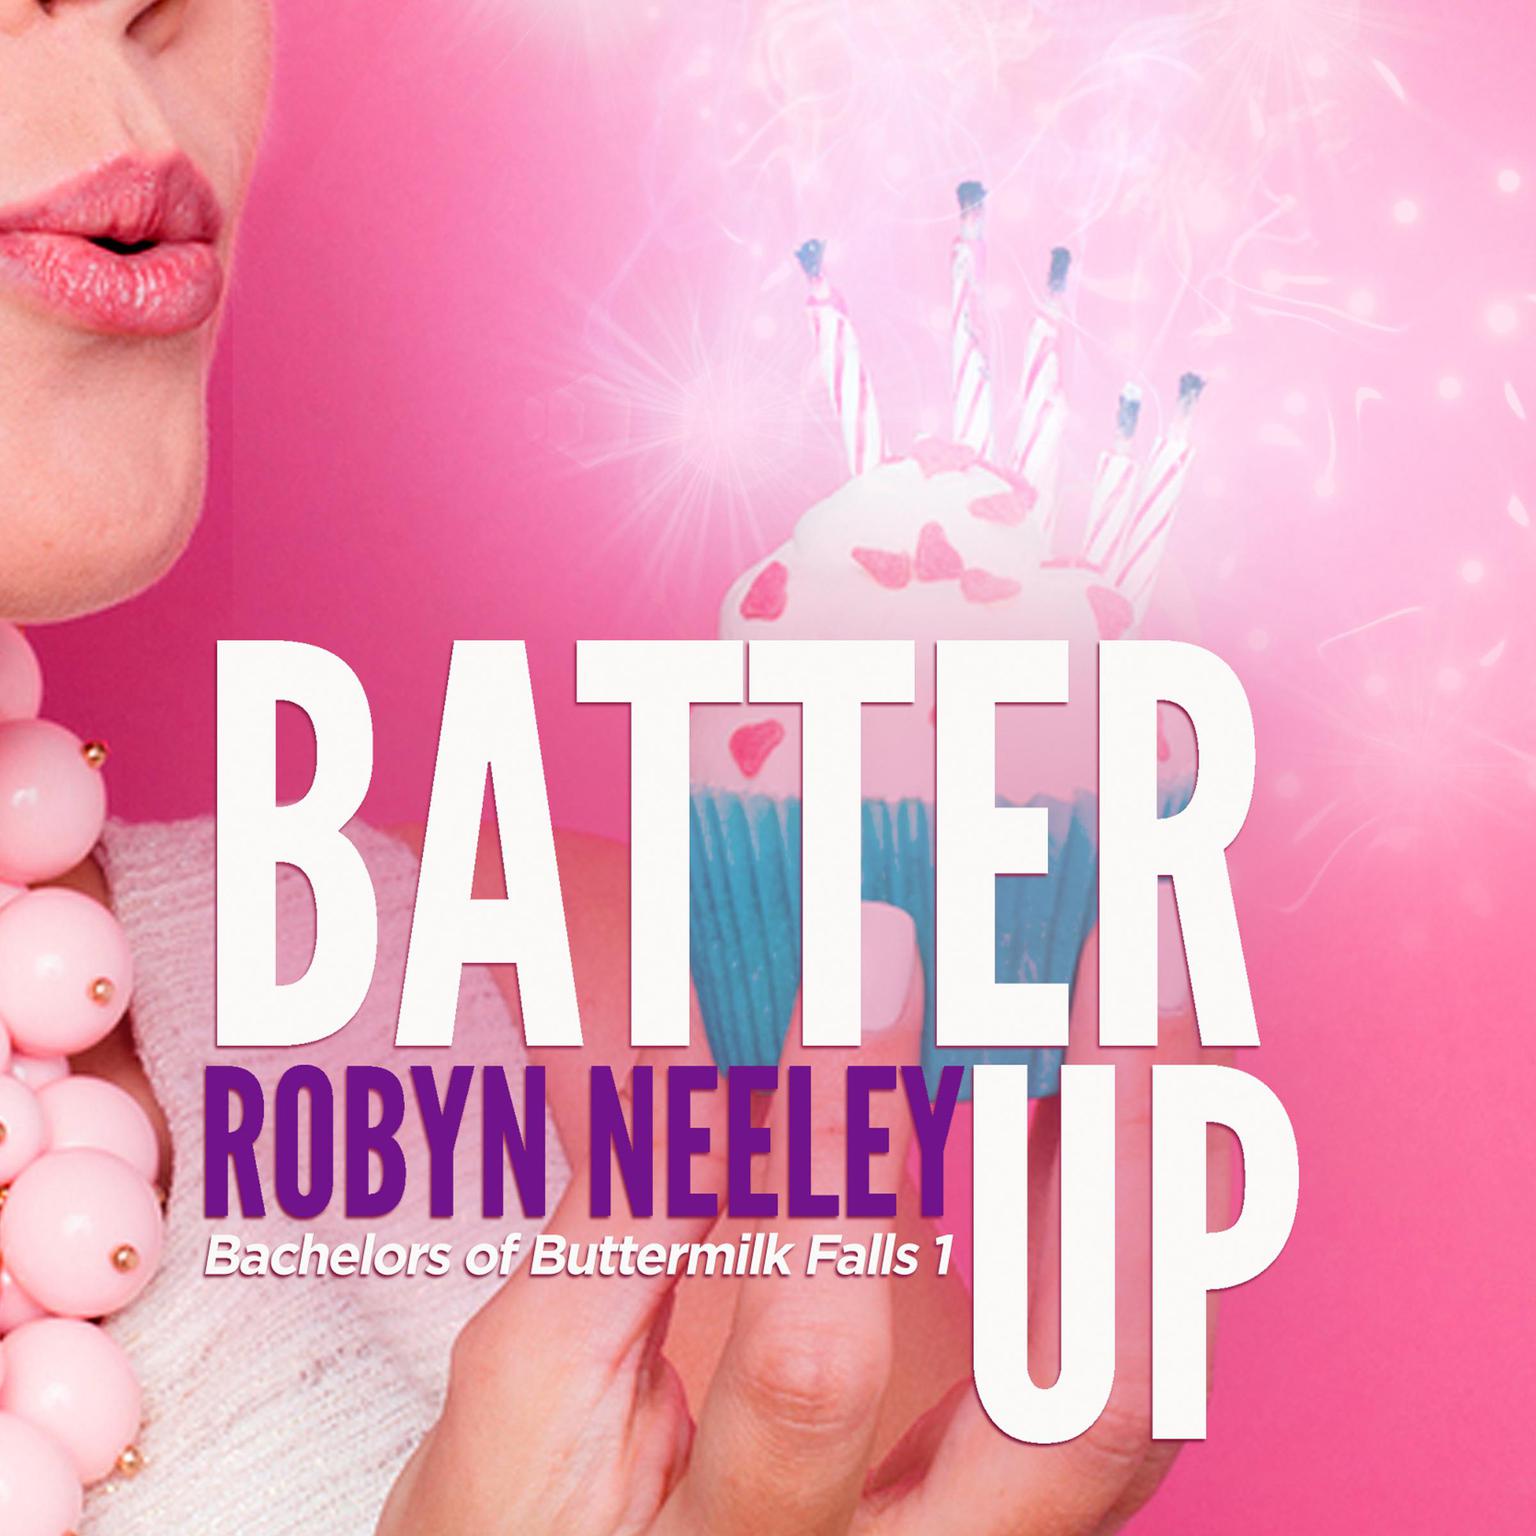 Batter Up Audiobook, by Robyn Neeley